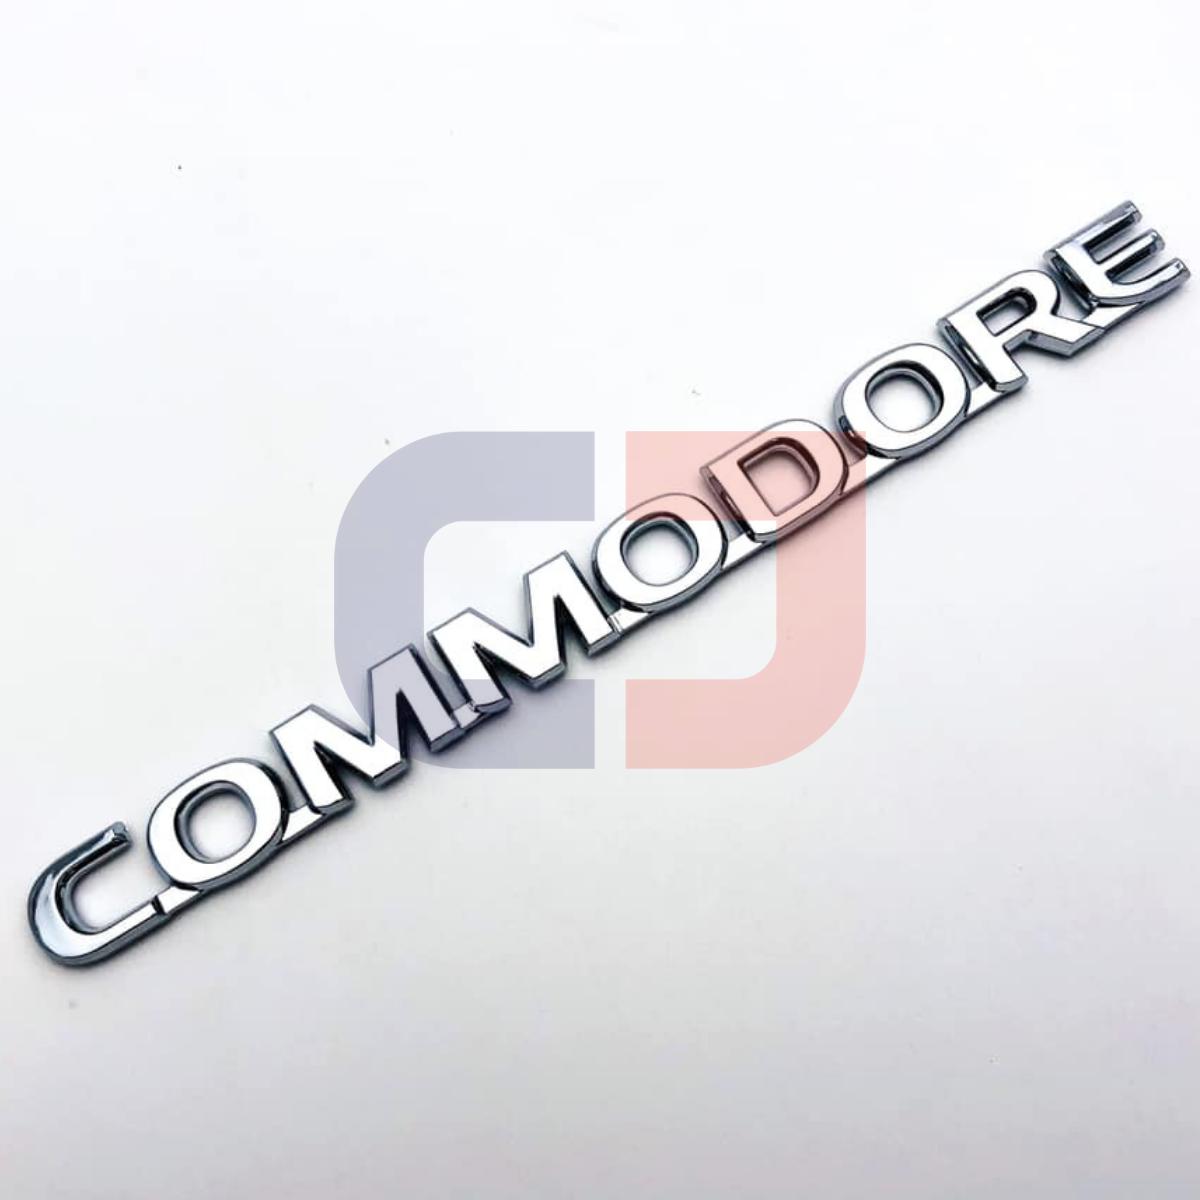 Holden Chrome Commodore Boot Badge